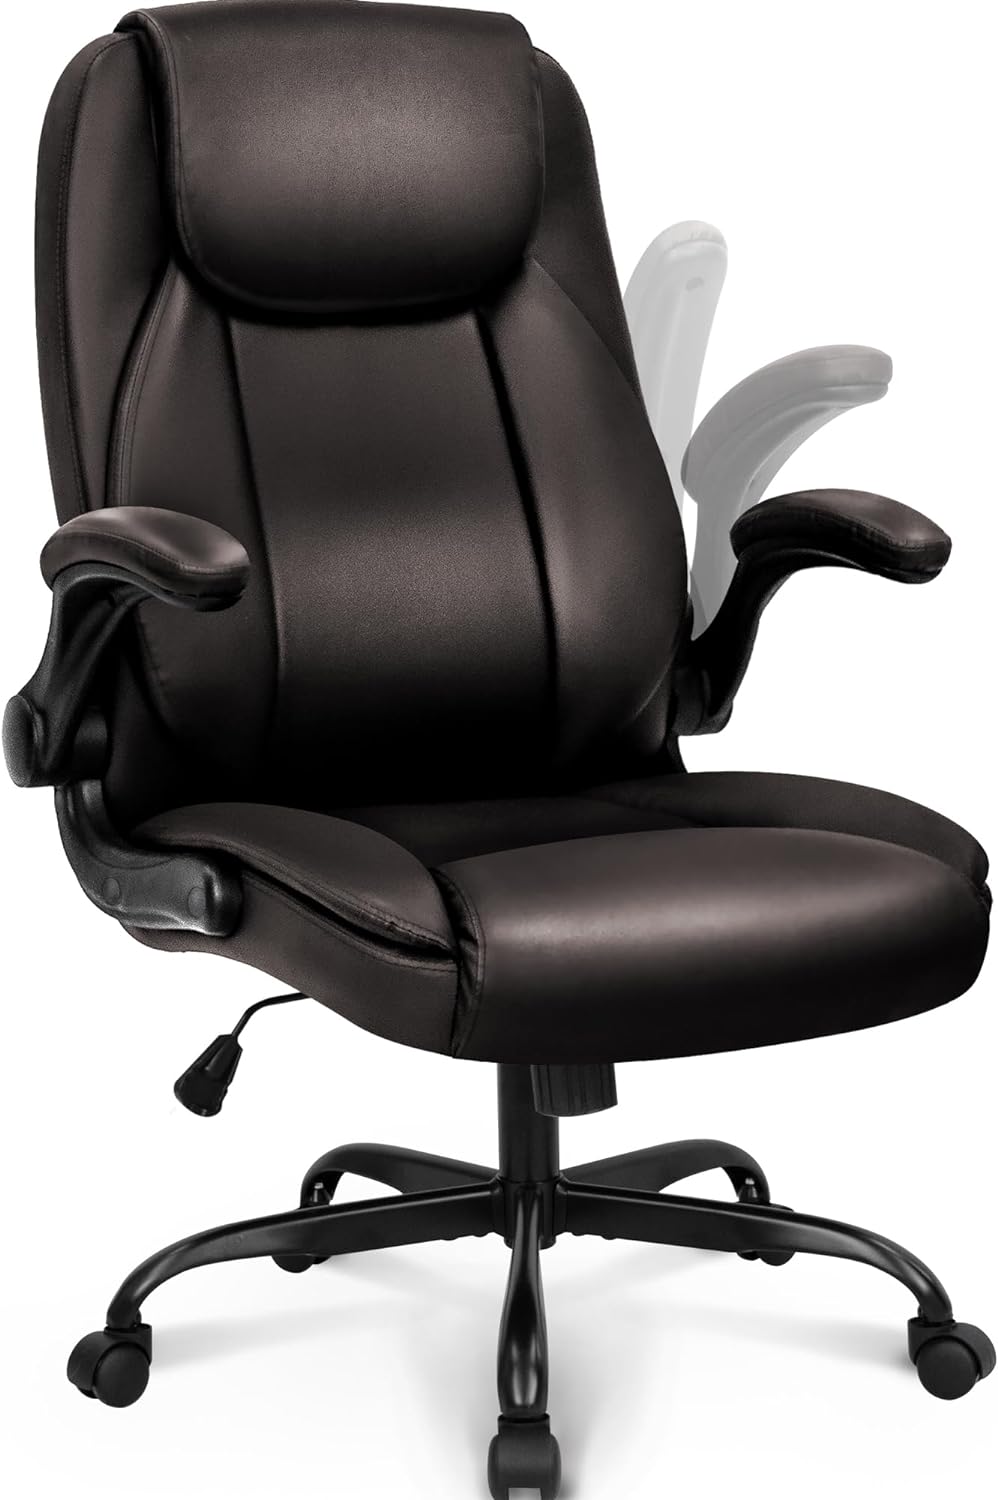 Read more about the article NEO CHAIR Ergonomic Office Chair PU Leather for ONLY $109.97 (Was $179.98)